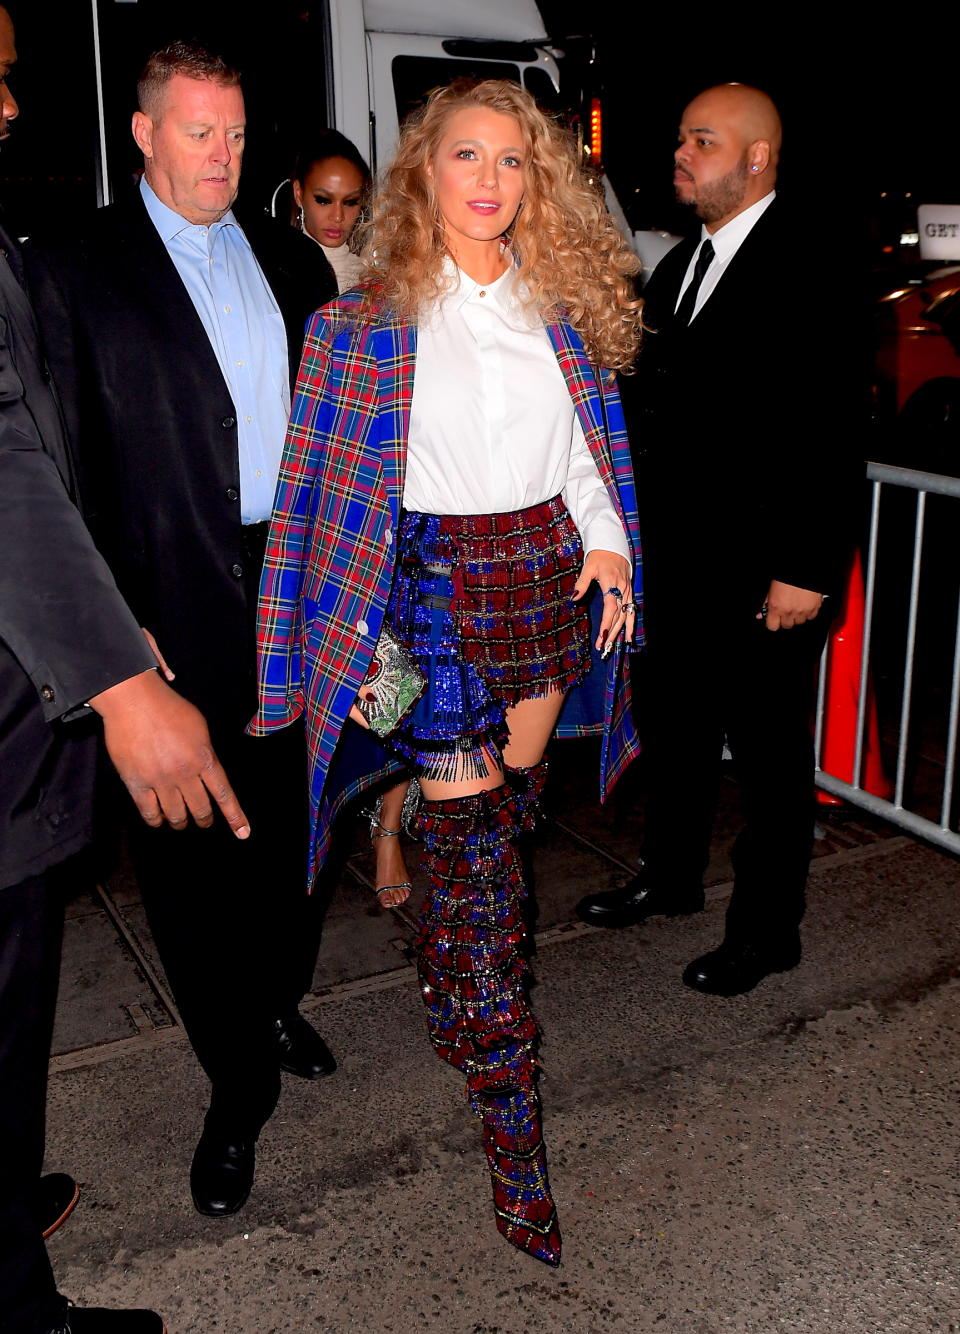 <p>The fashion didn’t stop at the Metropolitan Museum for Blake Lively on Monday night. She continued her fashion reign as one of the night’s best dressed as she changed out of her stunning Versace gown into a tartan ensemble with a mini skirt, matching knee high boots, and a blue jacket draped over her shoulders. (Photo: Splash News) </p>